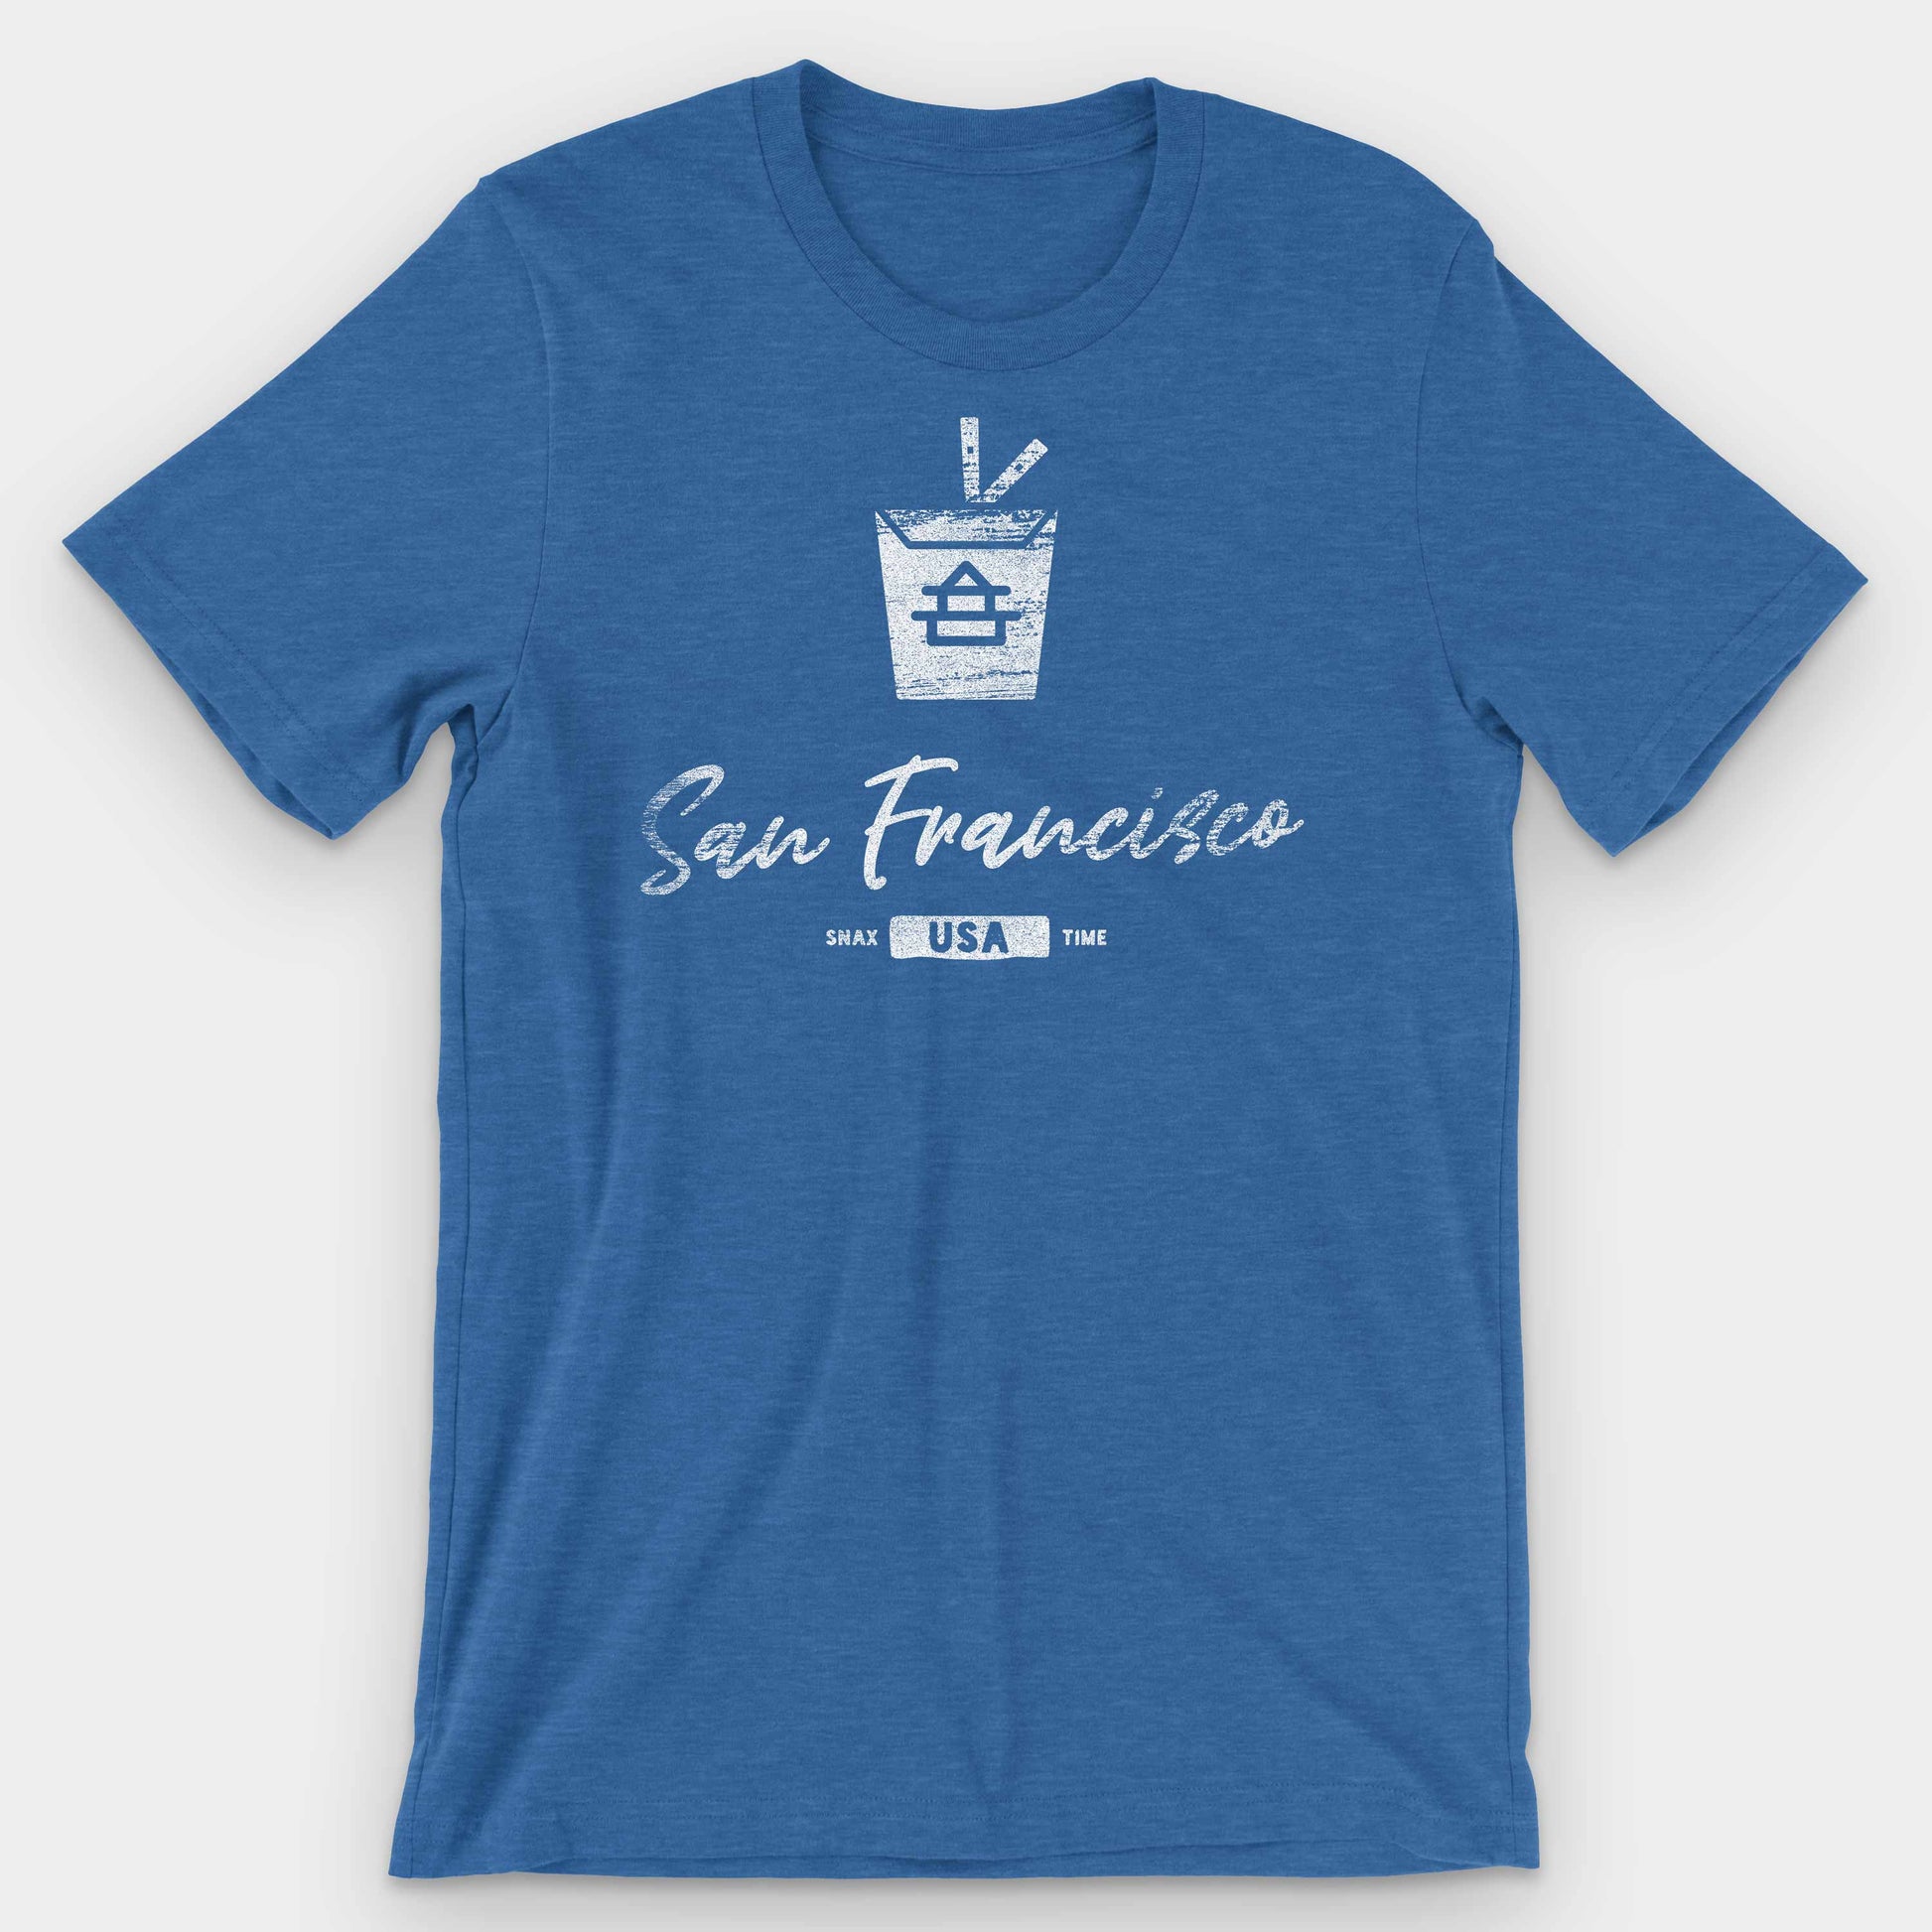 Heather True Royal San Francisco Chinese Takeout Graphic T-Shirt by Snaxtime